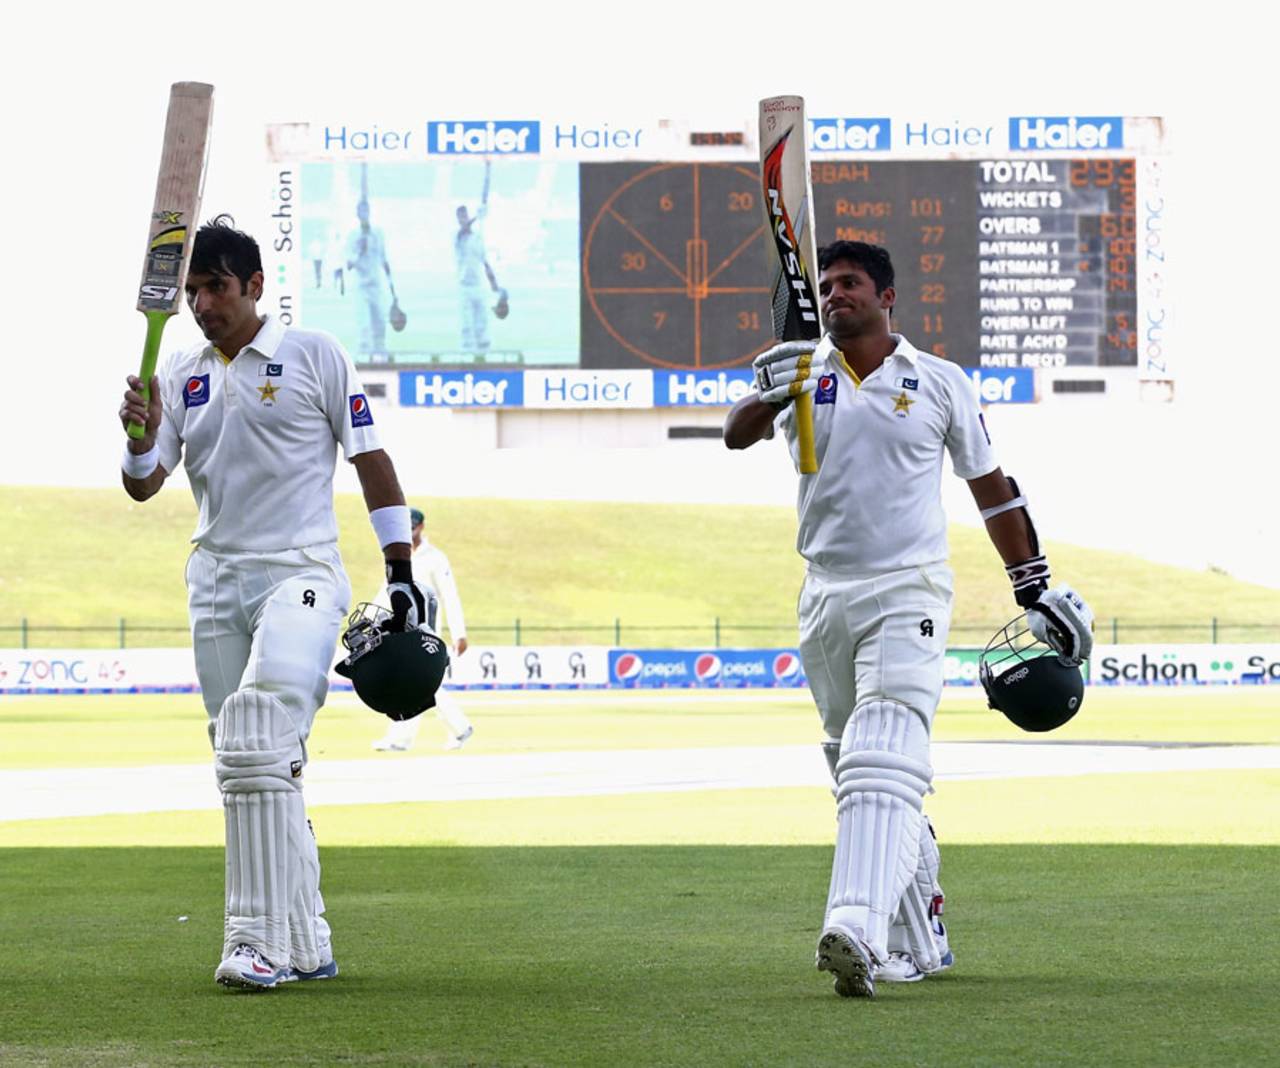 Good old boys: Misbah-ul-Haq and Azhar Ali made their debuts in their mid-20s, late by traditional Pakistan standards, and have come to embody an ethic that goes against the idea of the mercurial Pakistan side&nbsp;&nbsp;&bull;&nbsp;&nbsp;Getty Images